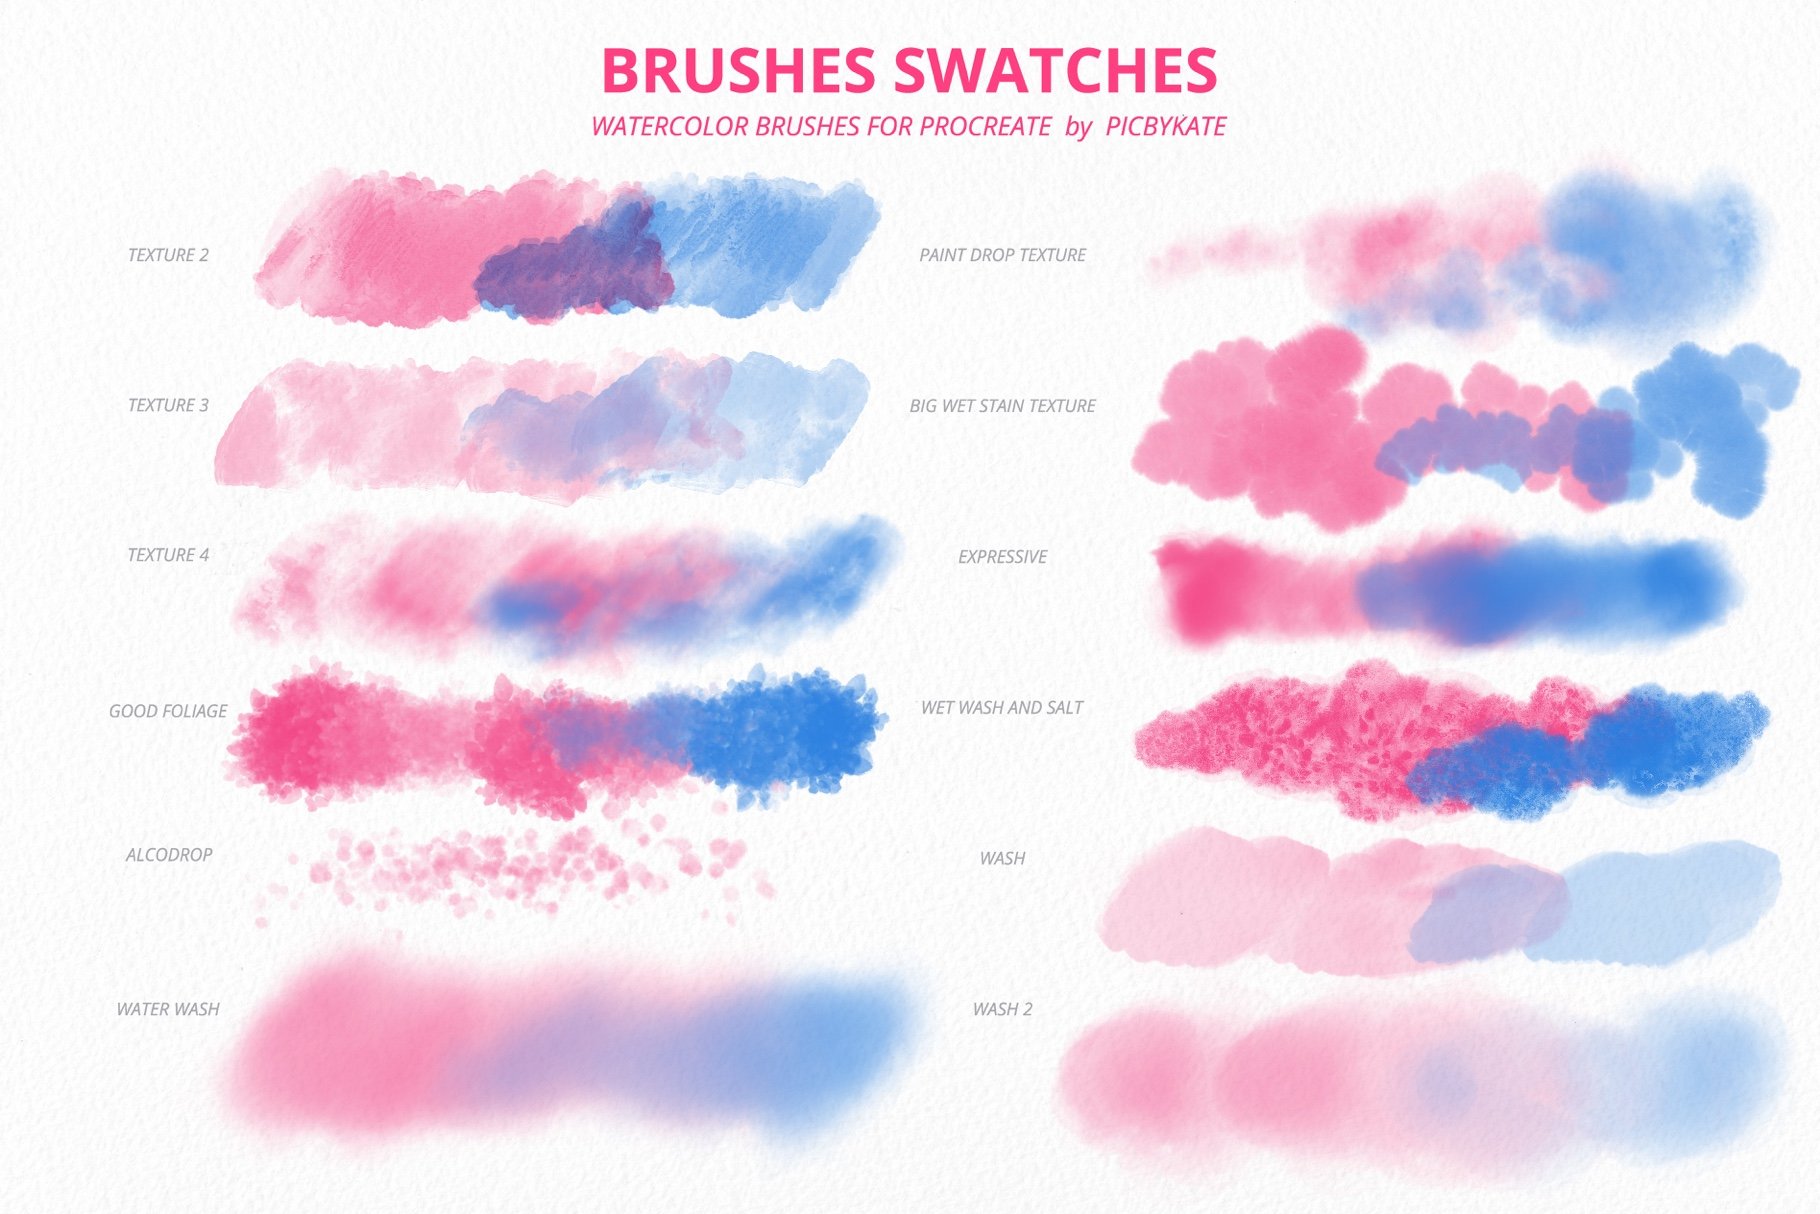 50 Procreate Watercolor Brushes